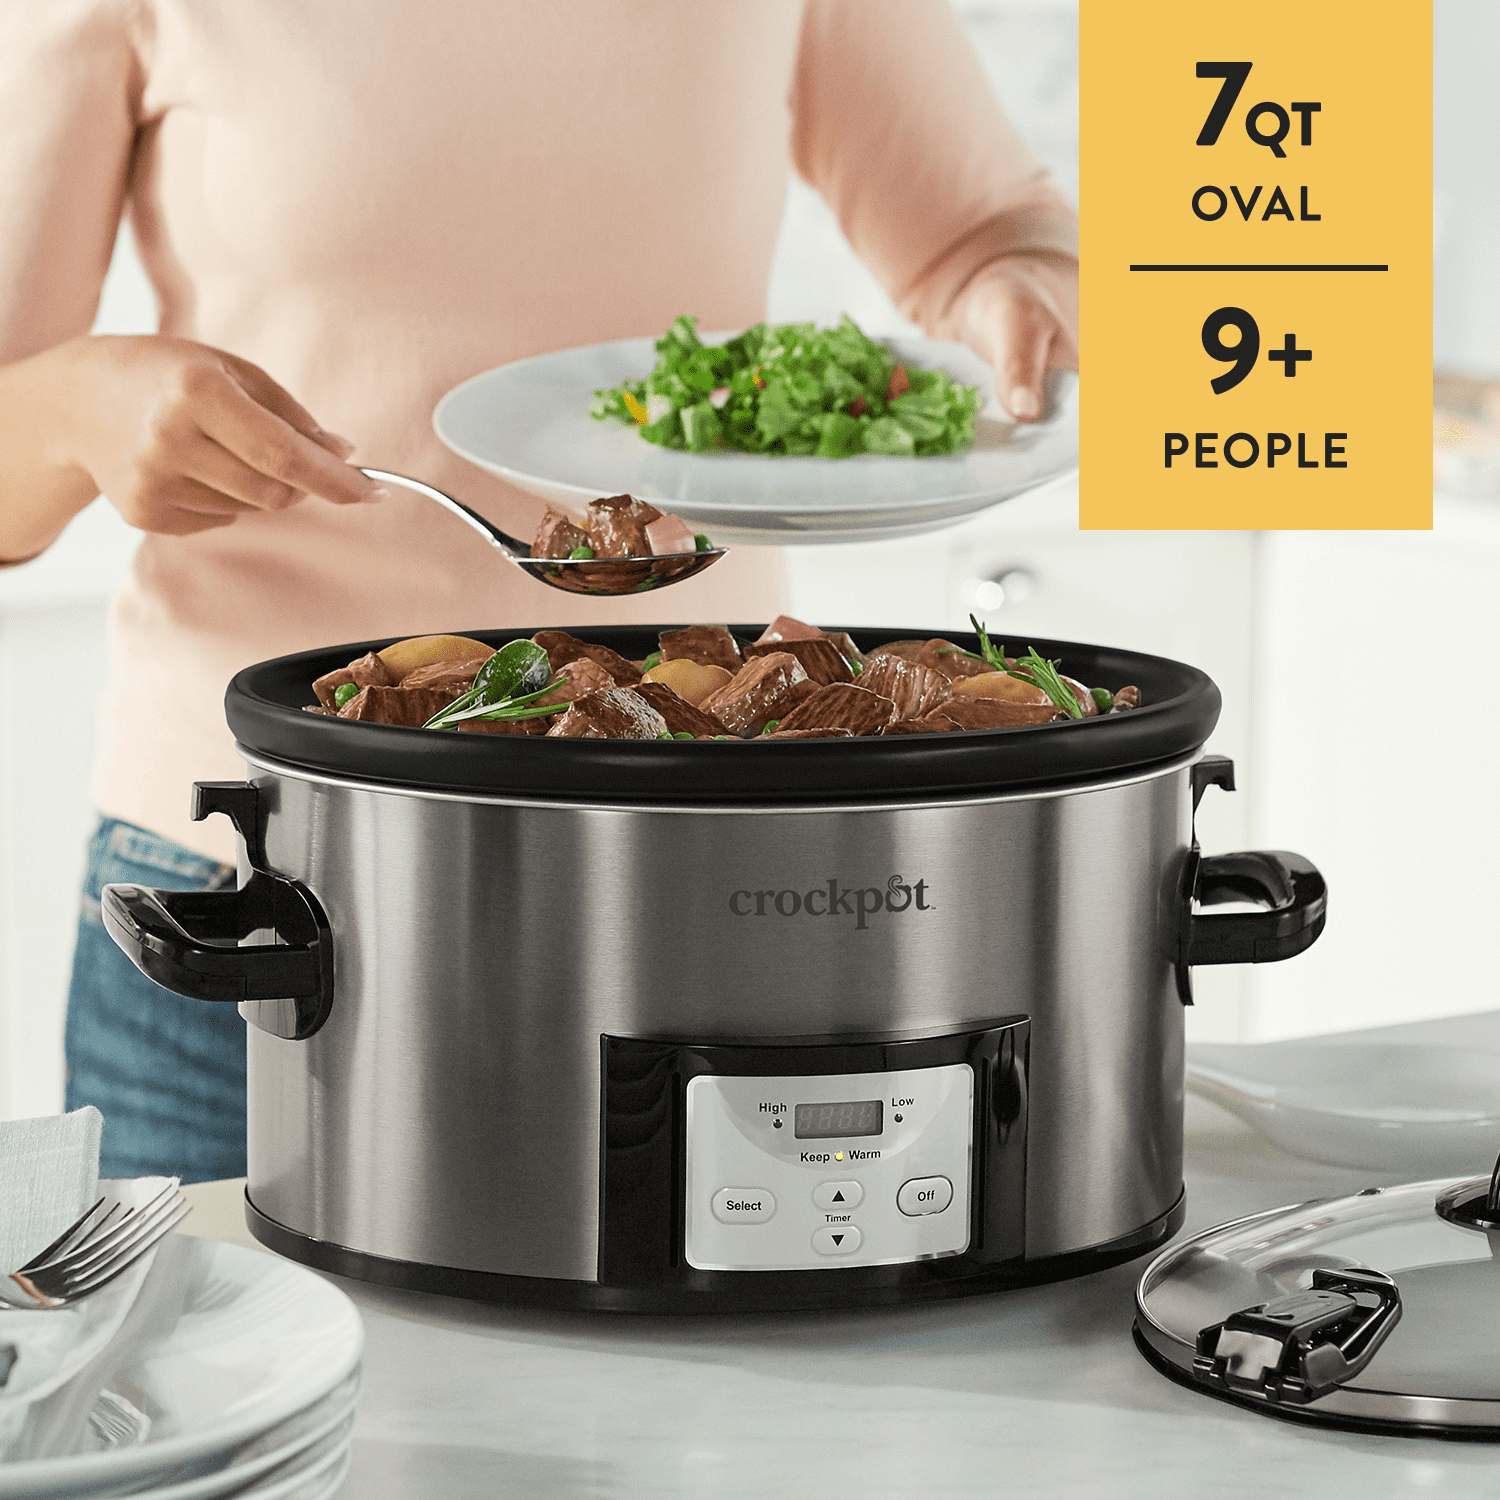 DēLonghi DCP707 Slow Cooker 7 quart tested and clean